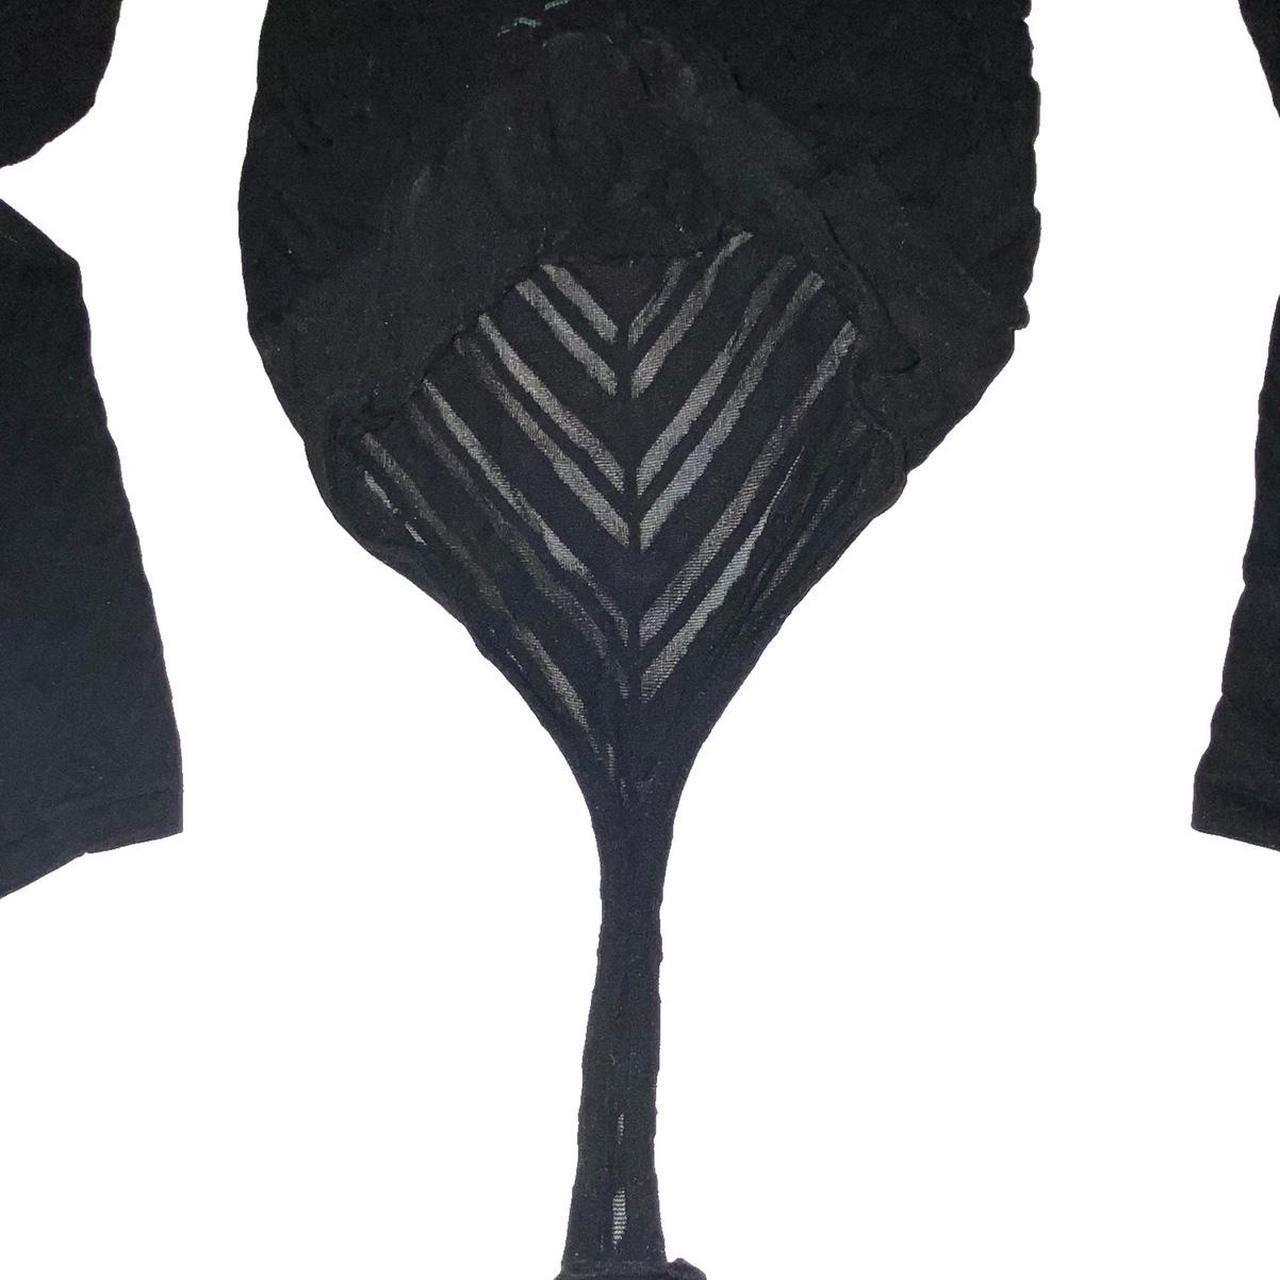 Product Image 3 - Sheer thong bodysuit ♡

ABOUT THIS